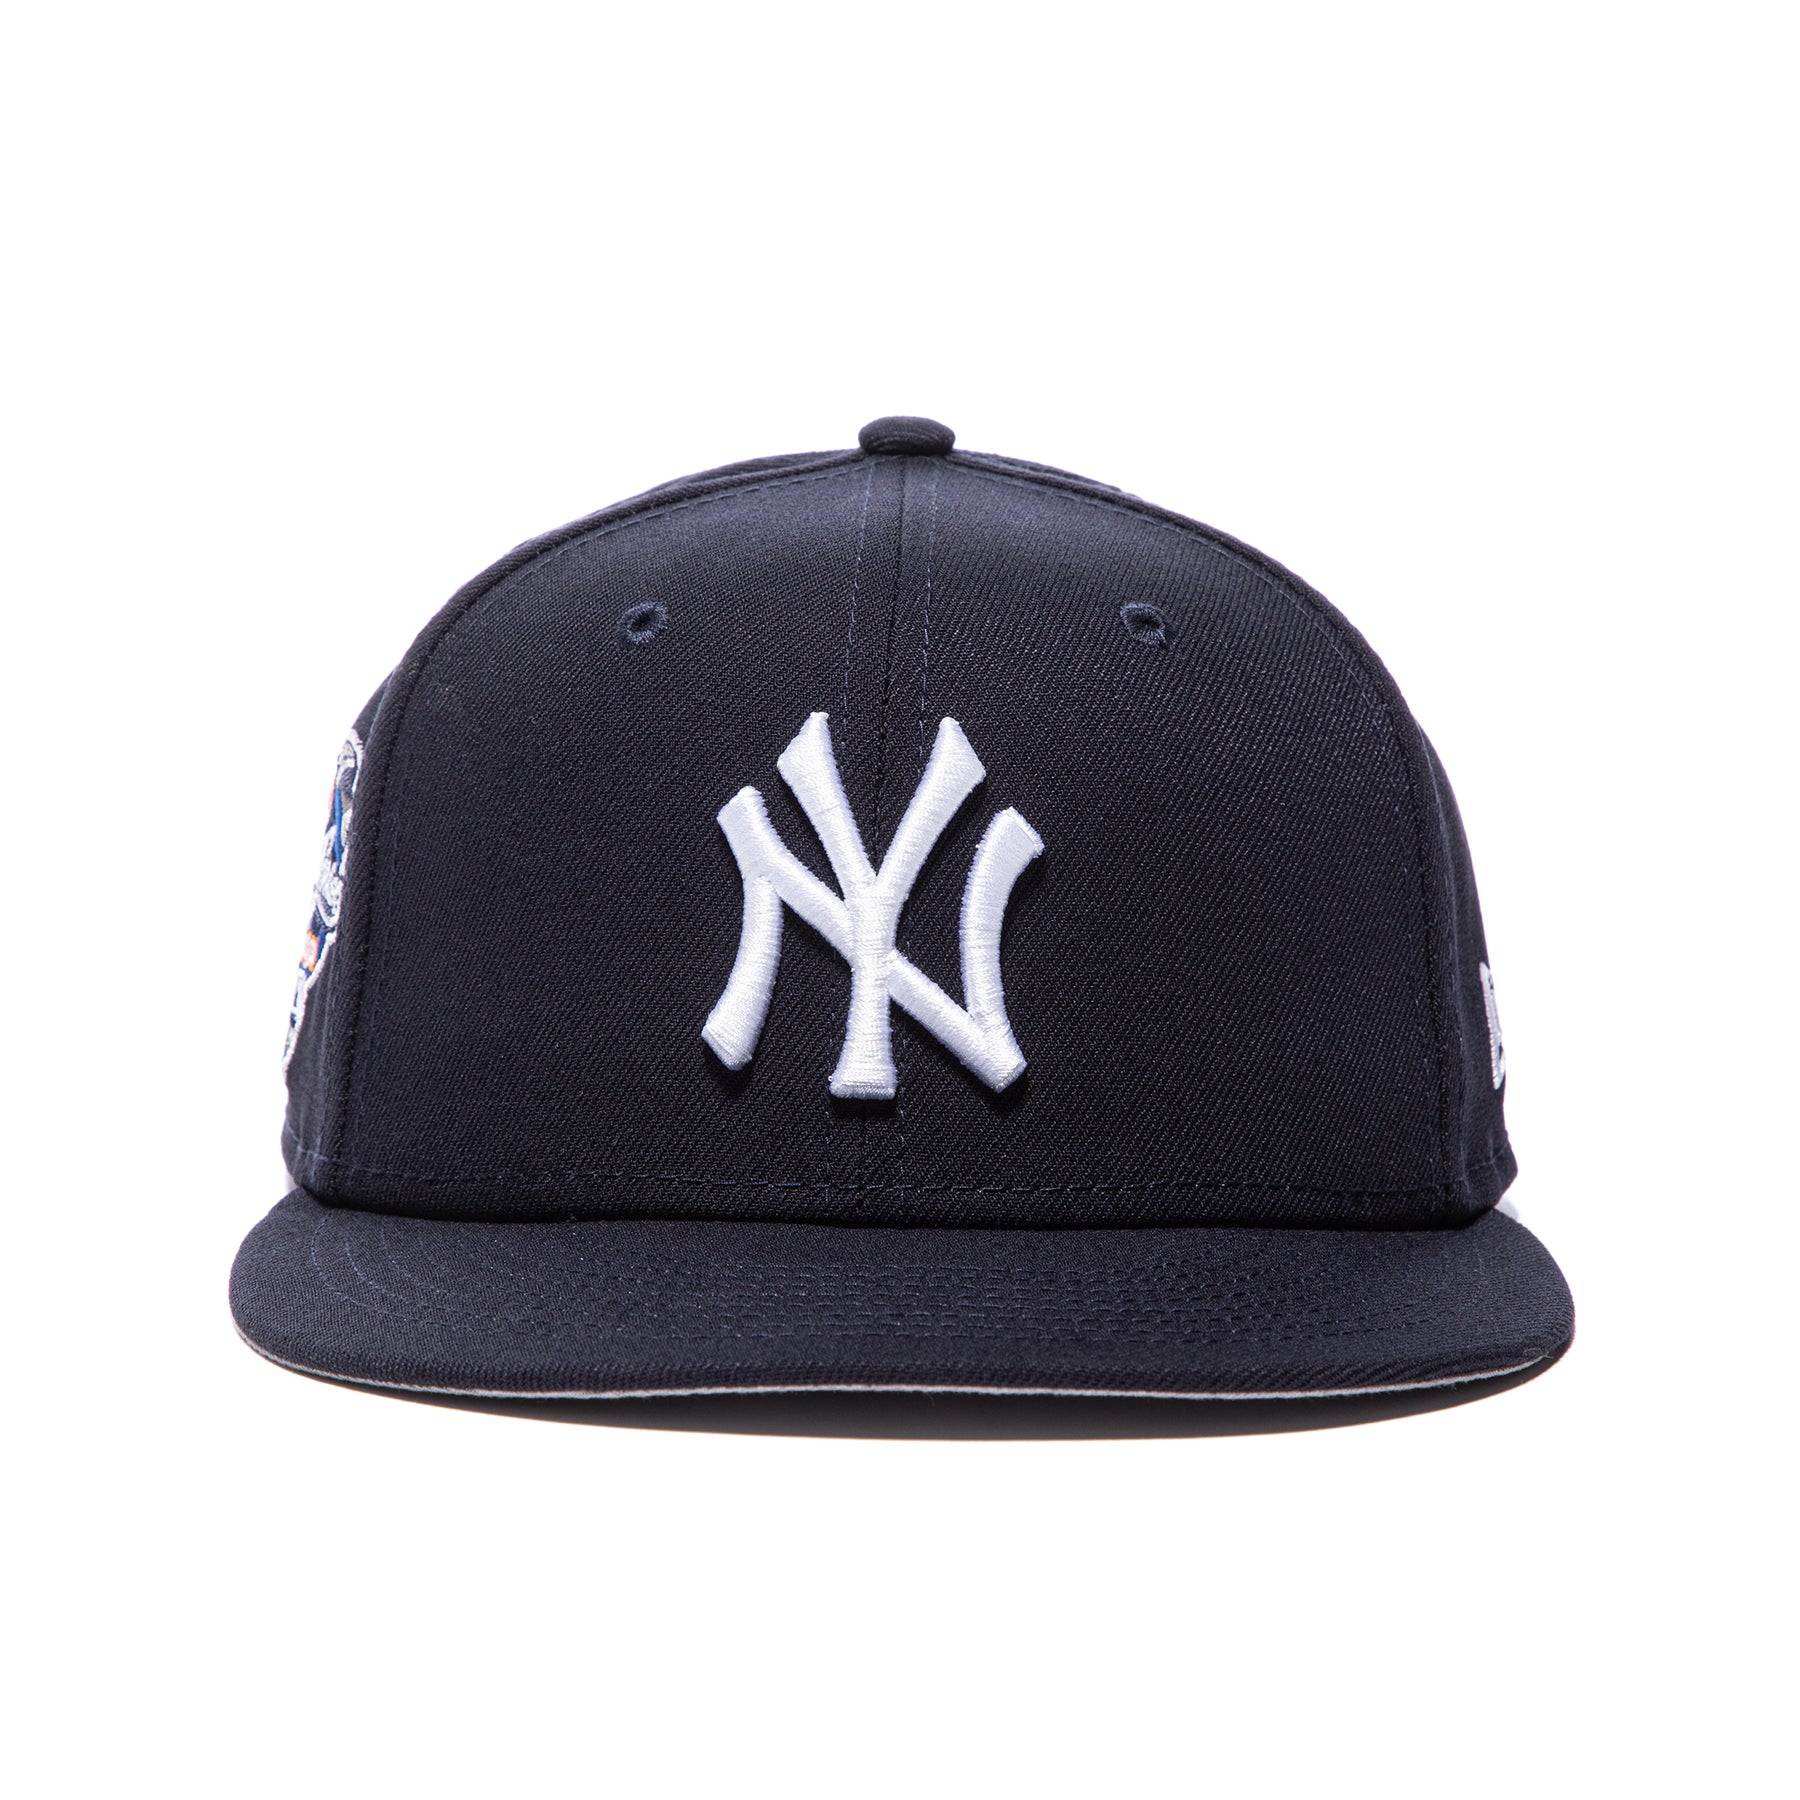 59FIFTY NEW YORK YANKEES POLARTEC FITTED CAP NAVY